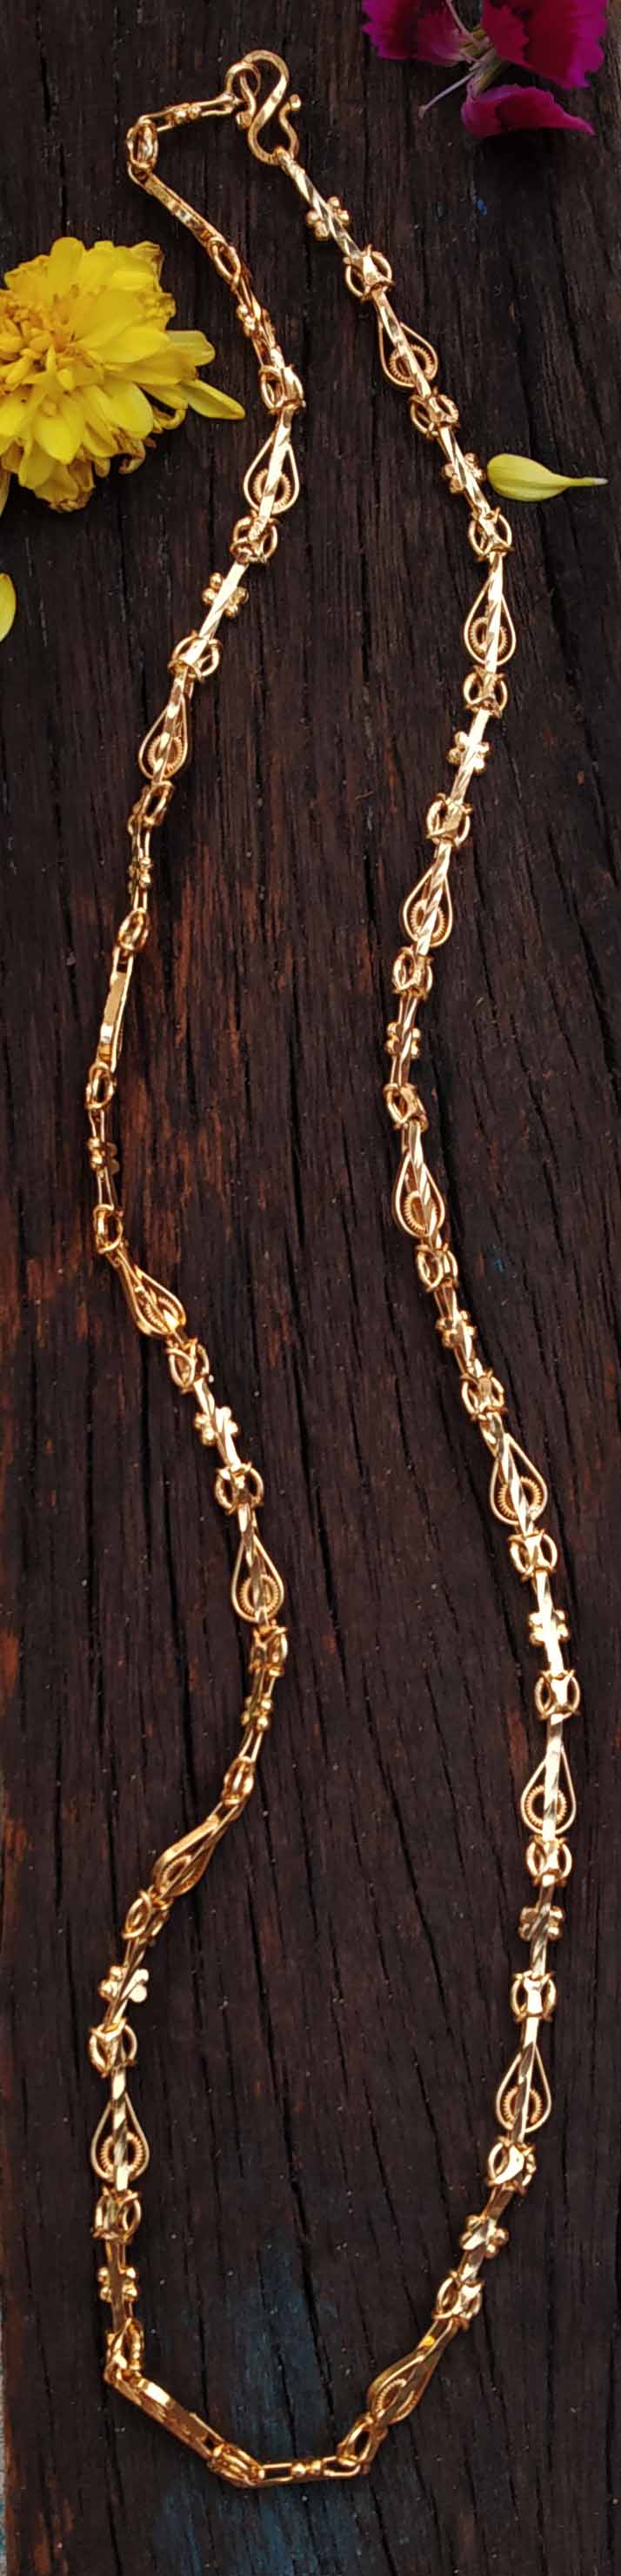 chain design gold plated